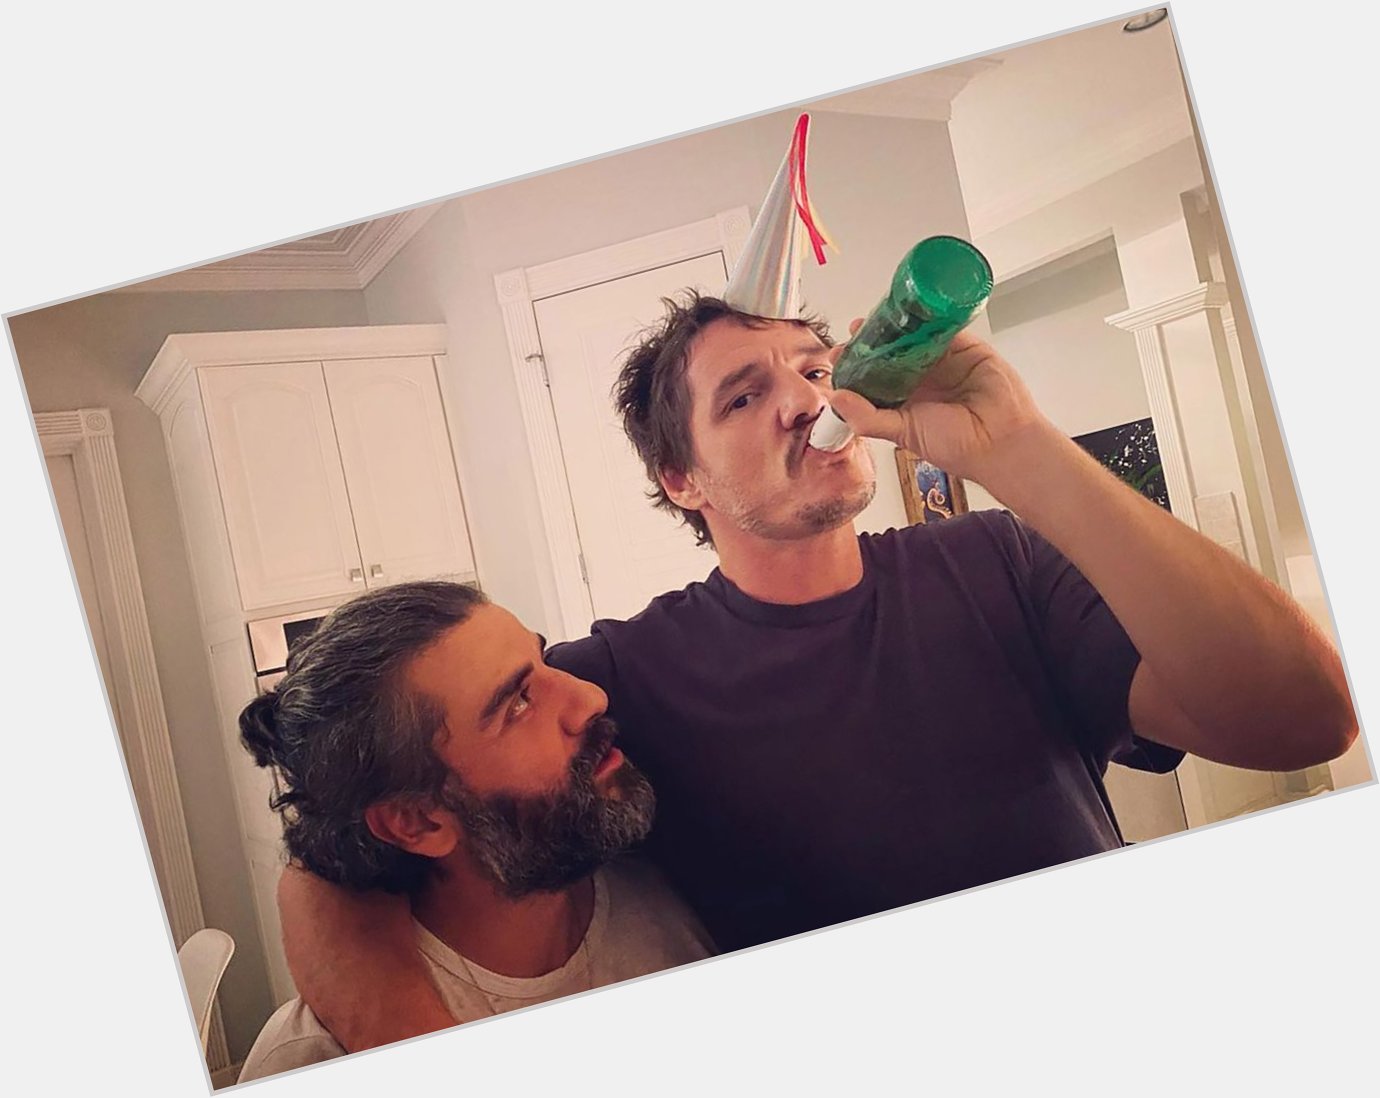 This is the way.

Wishing Pedro Pascal a very Happy Birthday 